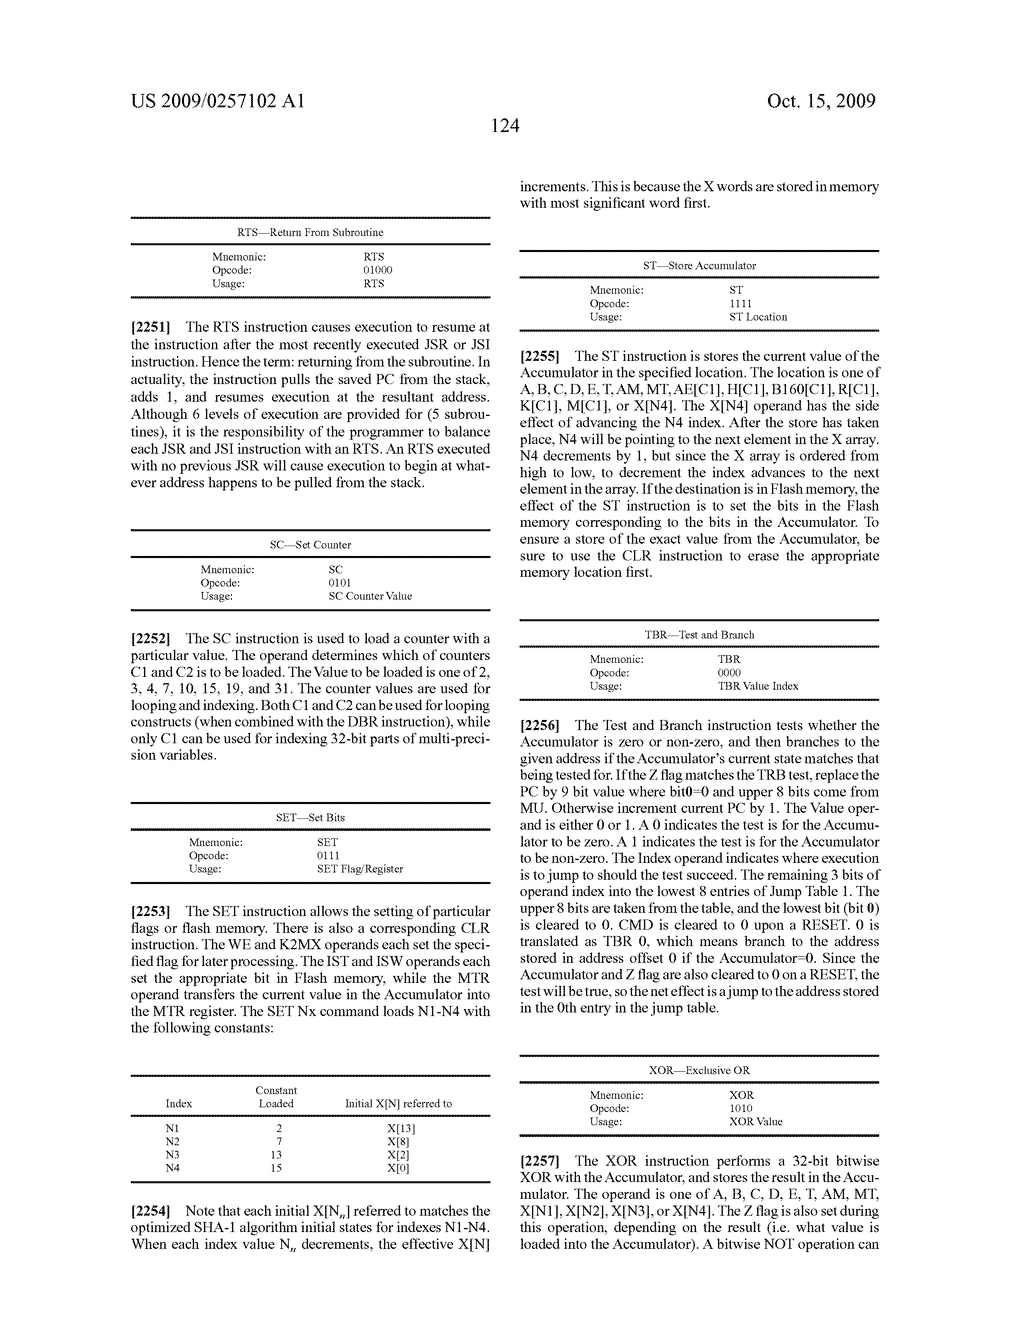 IMAGE PROCESSING APPARATUS HAVING CARD READER FOR APPLYING EFFECTS STORED ON A CARD TO A STORED IMAGE - diagram, schematic, and image 274